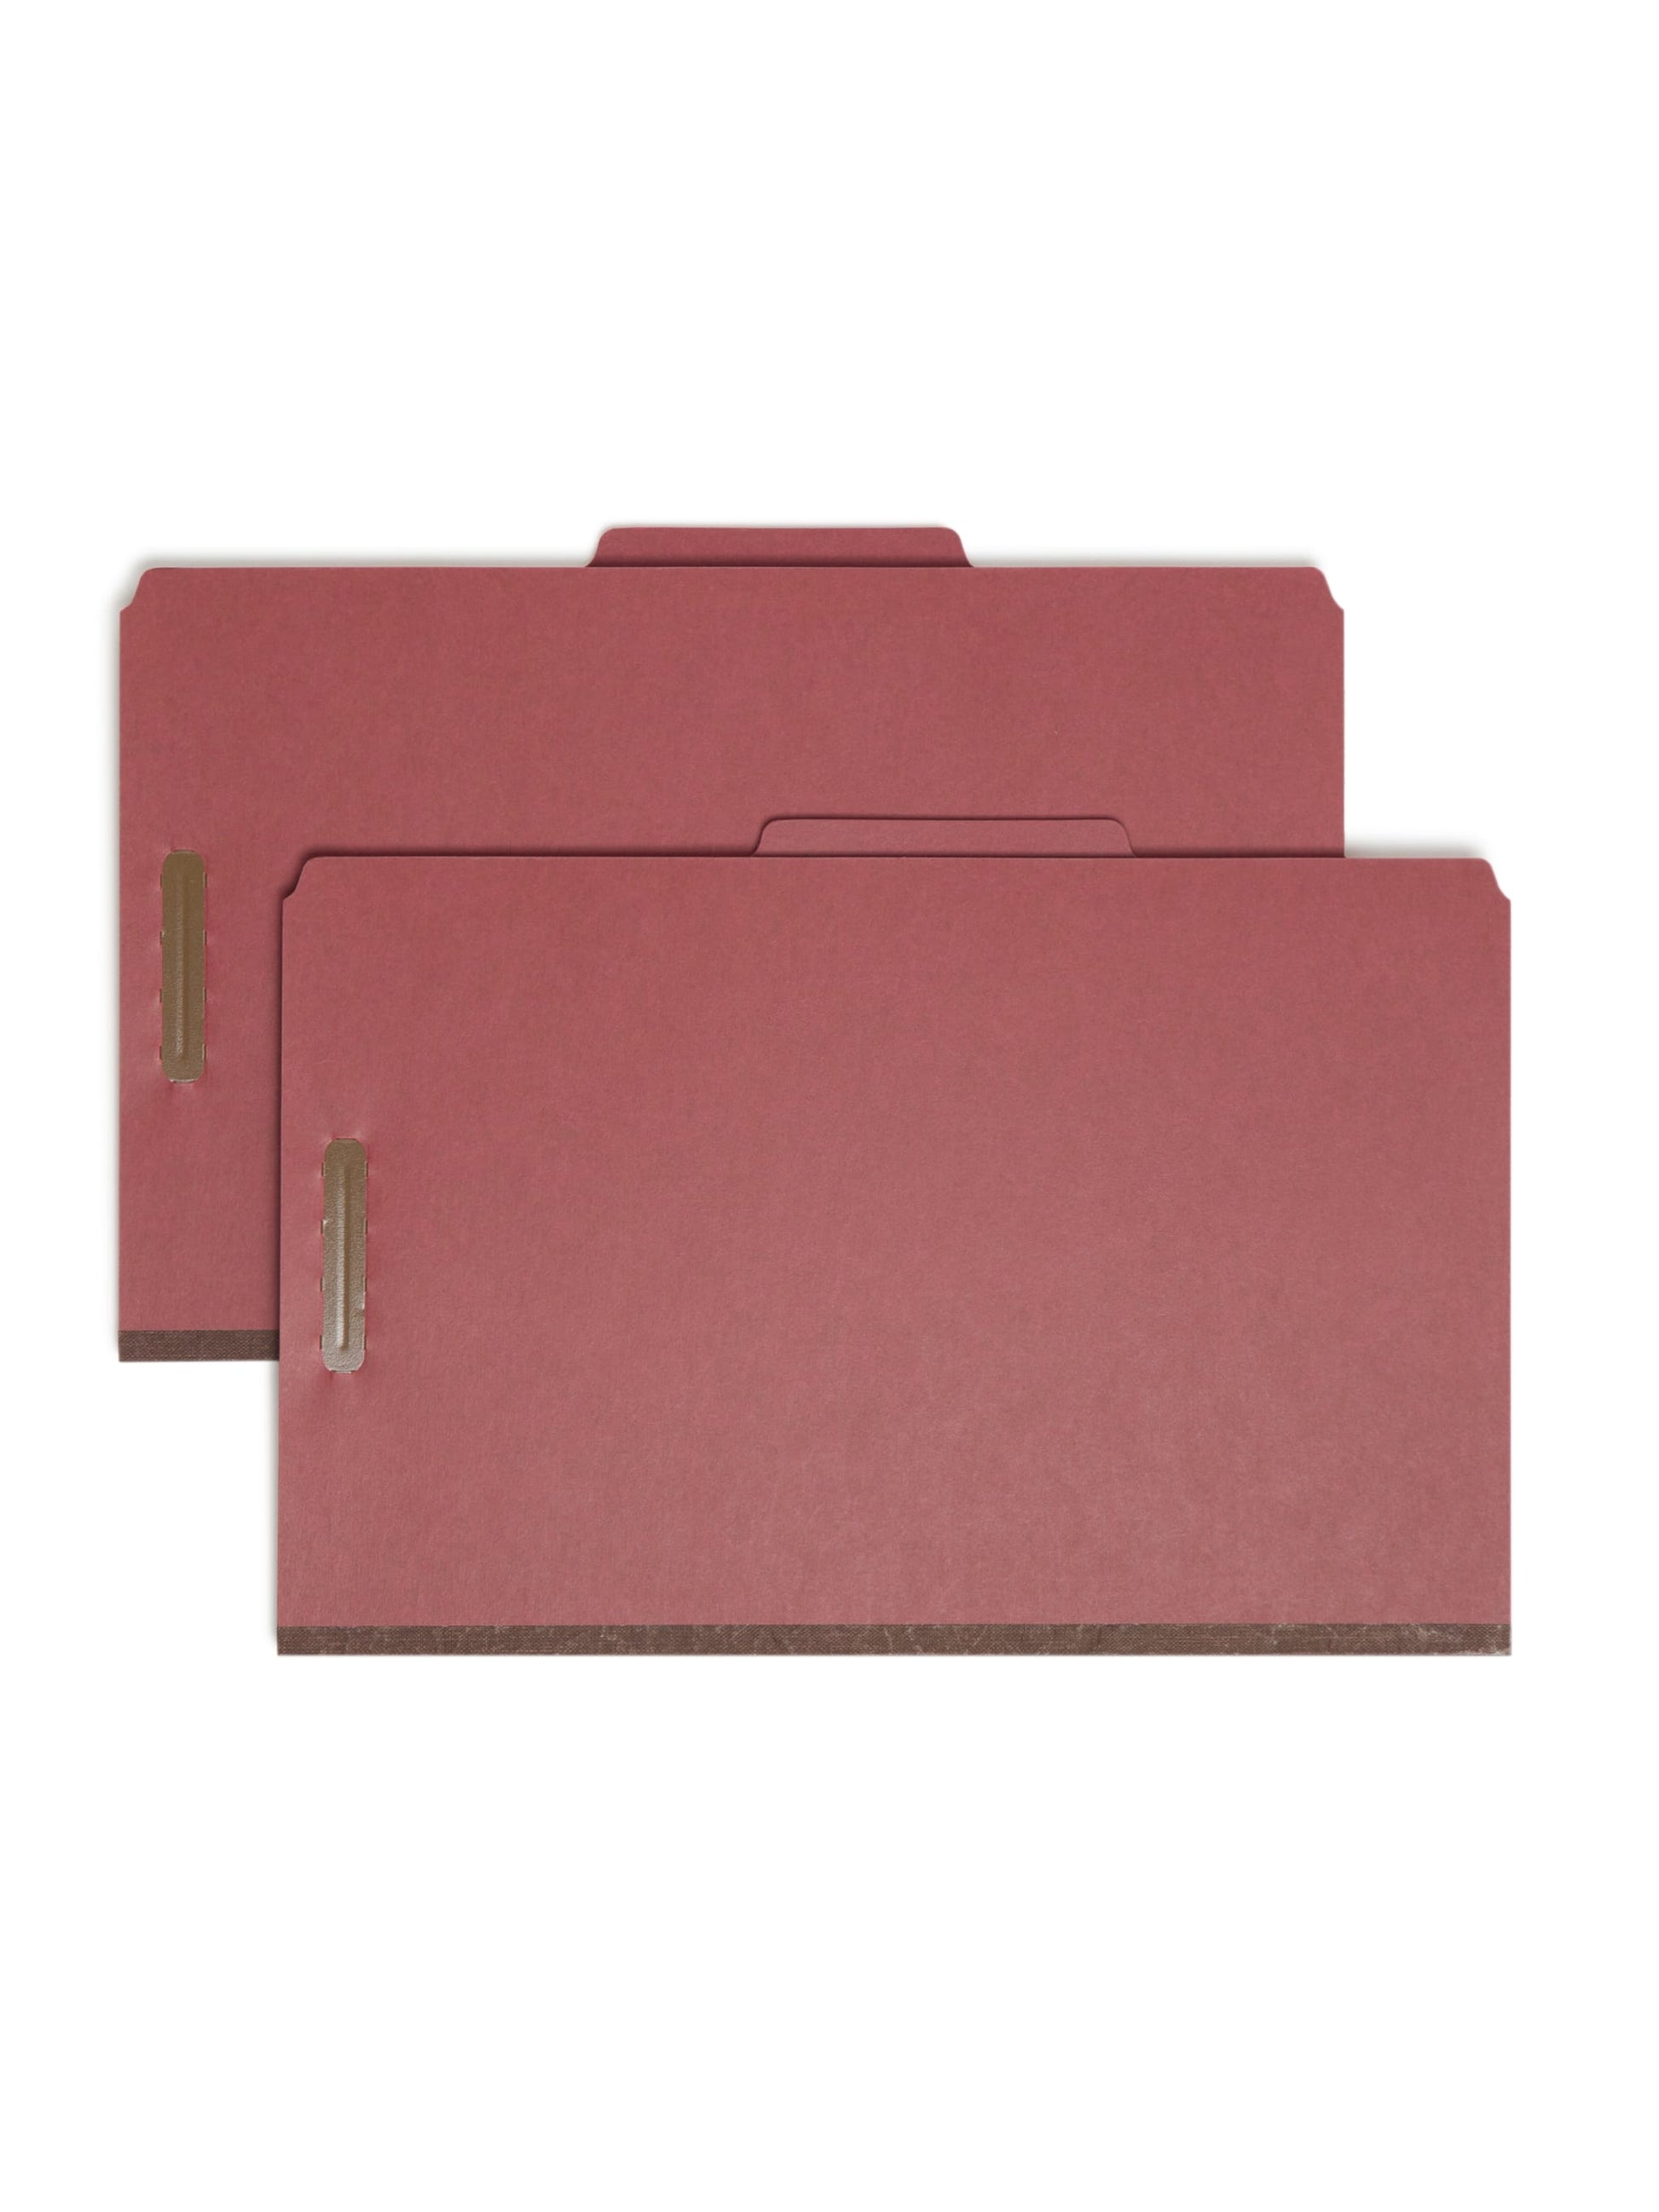 Pressboard Classification File Folders, 2 Dividers, 2 inch Expansion, Red Color, Legal Size, Set of 0, 30086486190238